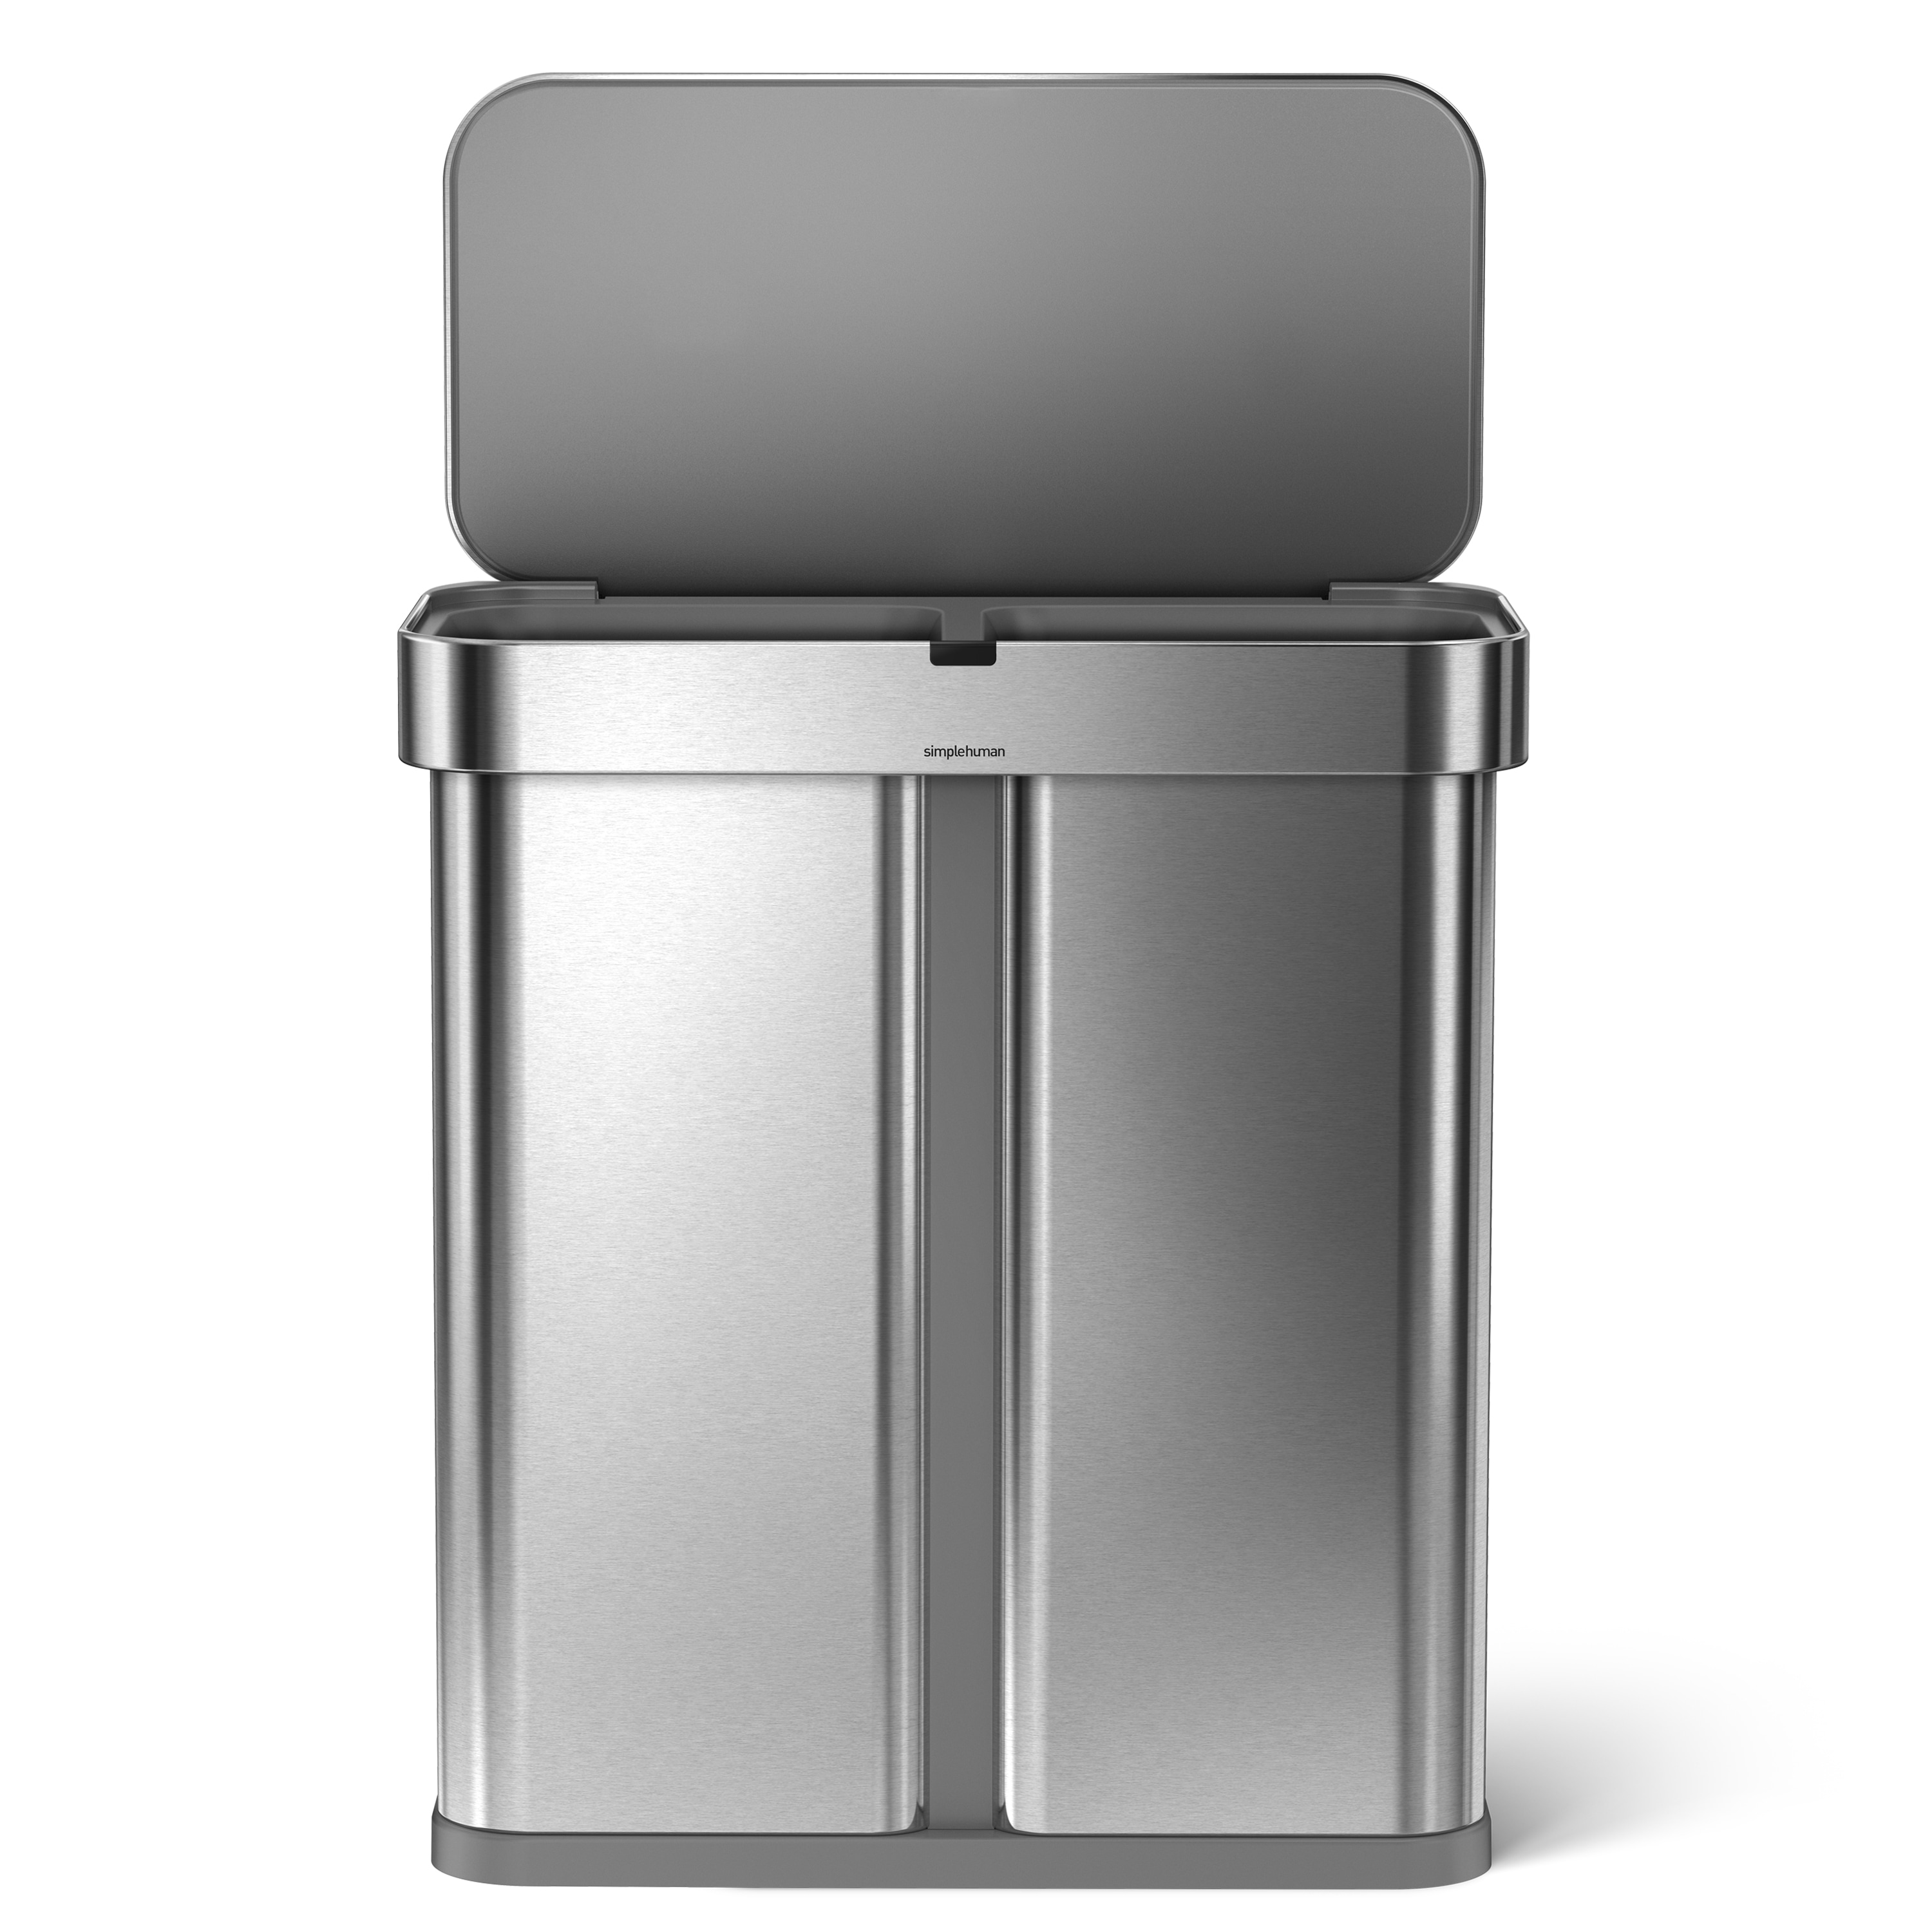  simplehuman 55 Liter / 14.5 Gallon Swing Top Can, Brushed  Stainless Steel + Code P 60 Pack Liners : Industrial & Scientific